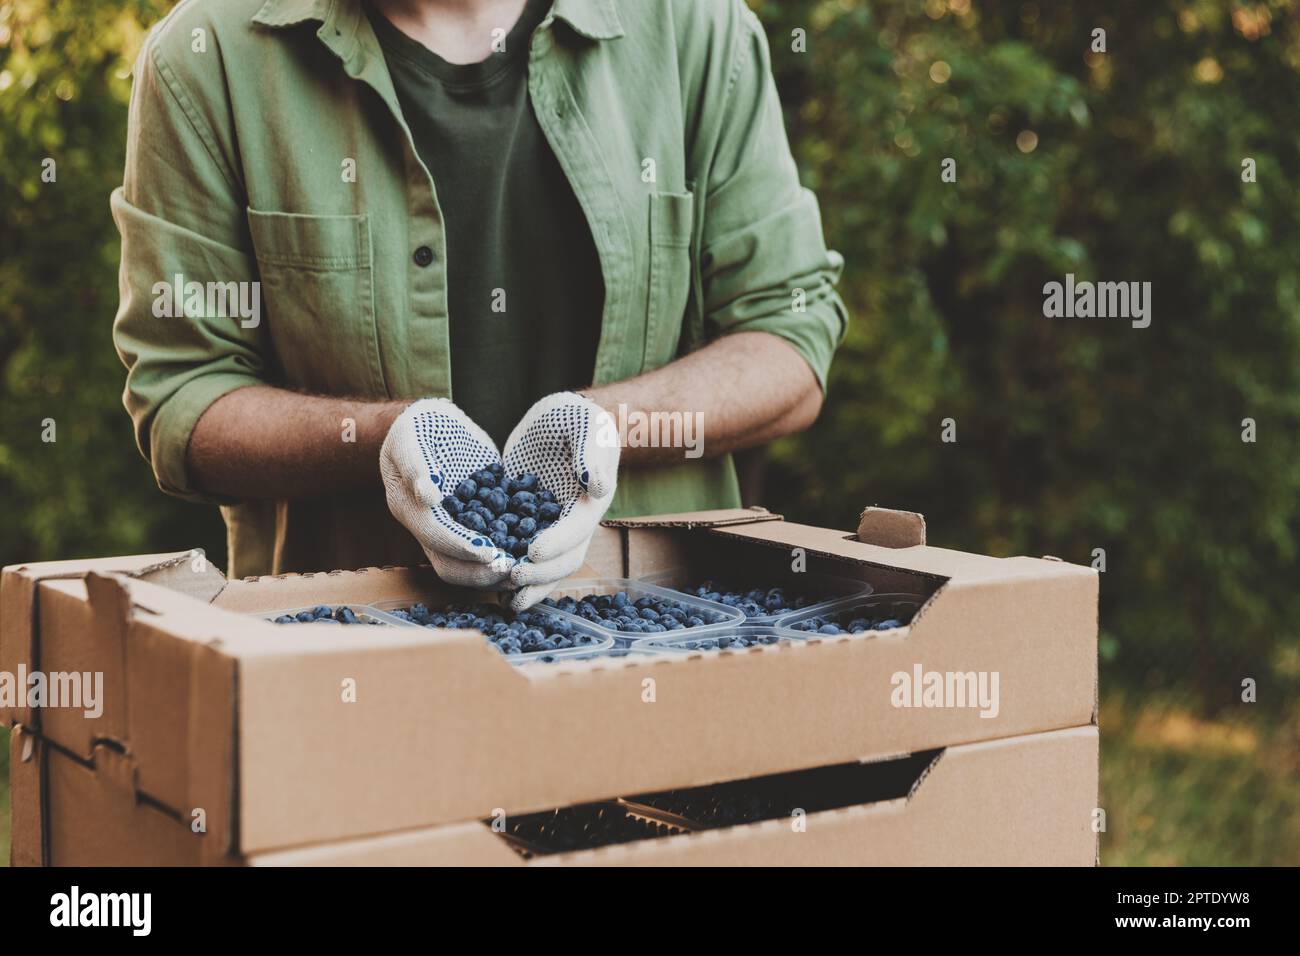 Hands of man wears green clothes holding many large blueberries over cardboard box or crate full of plastic containers with blueberry. Berry shipping, Stock Photo